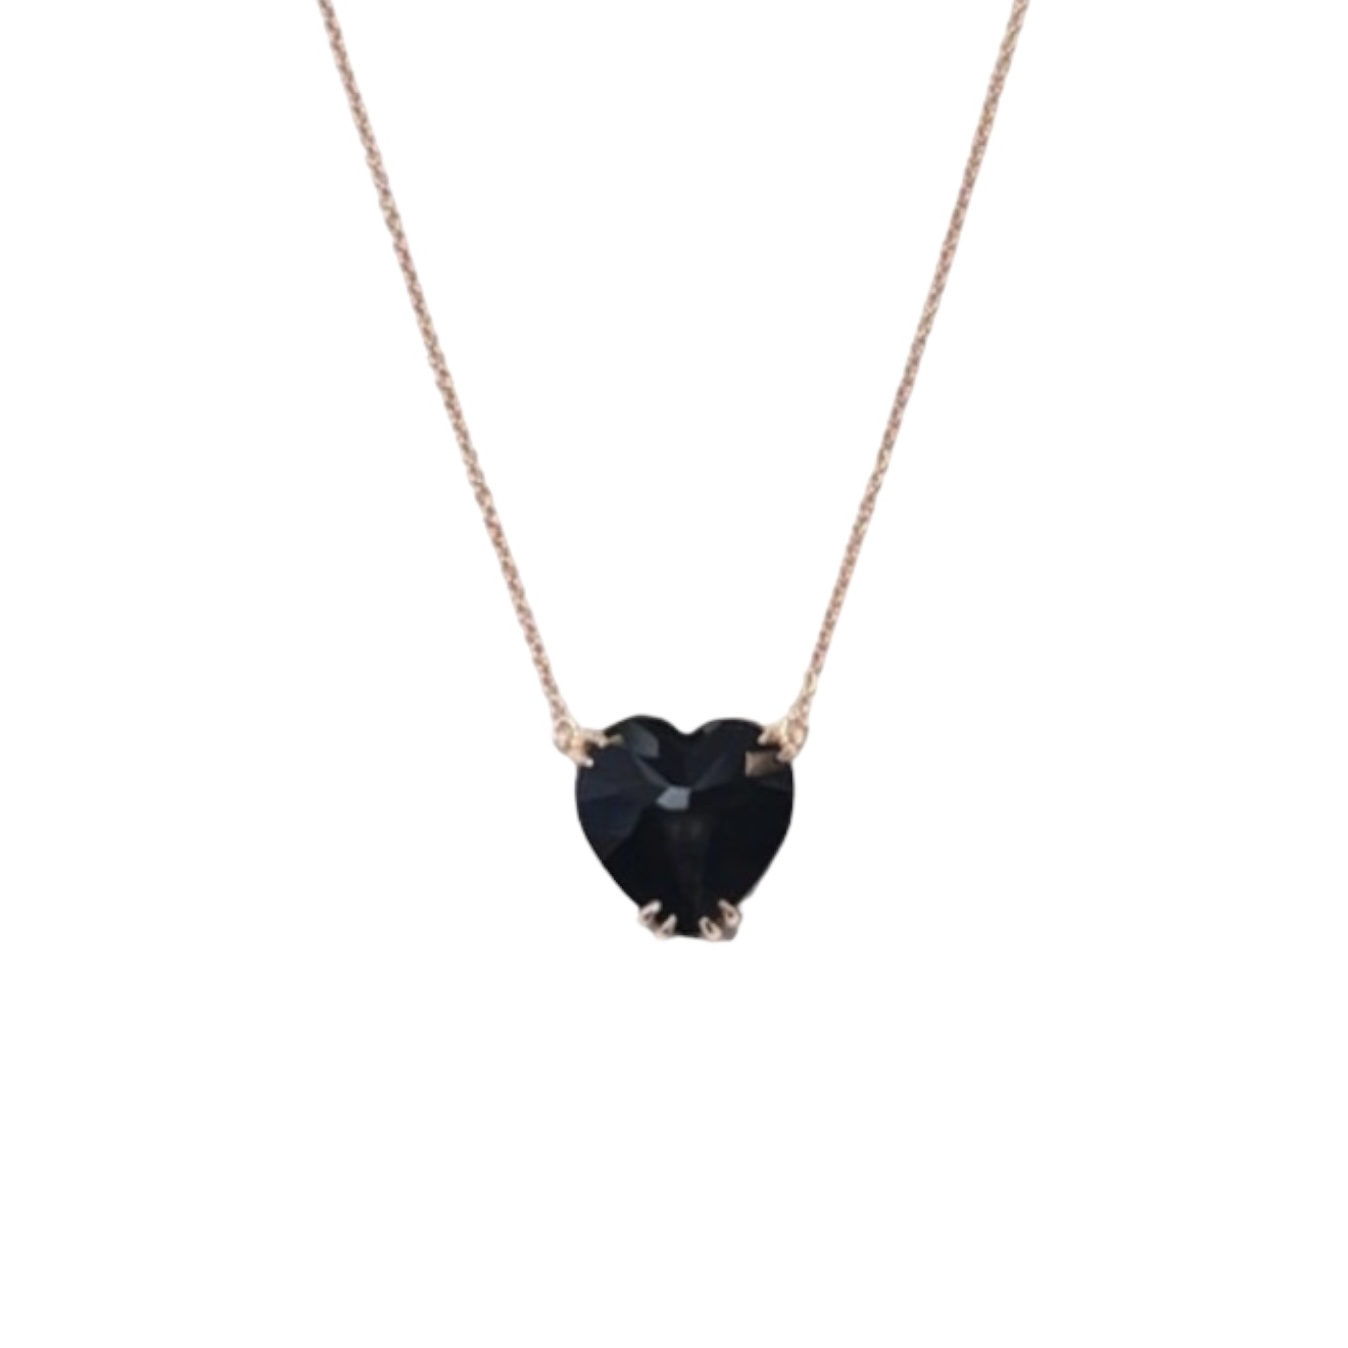 HEART NECKLACE